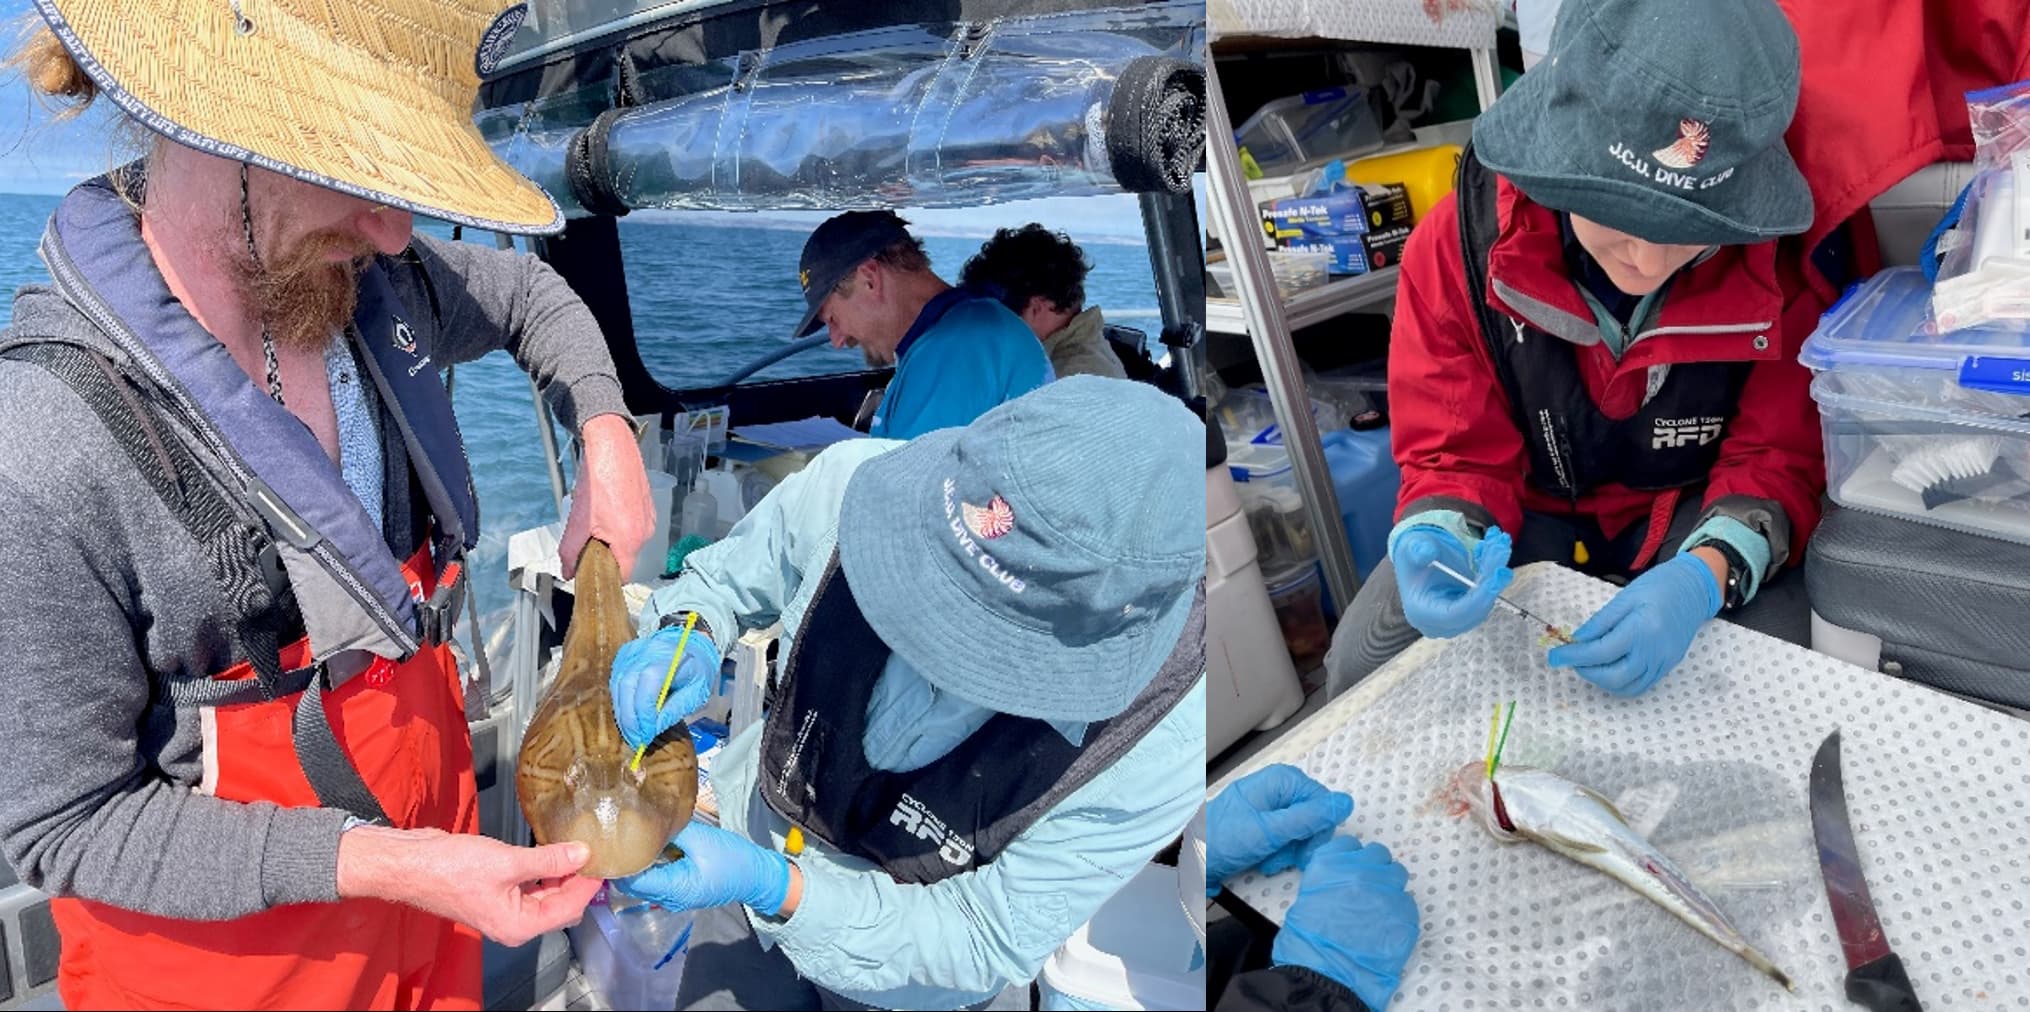 ecotoxicological analysis and sampling of blood from sand flathead